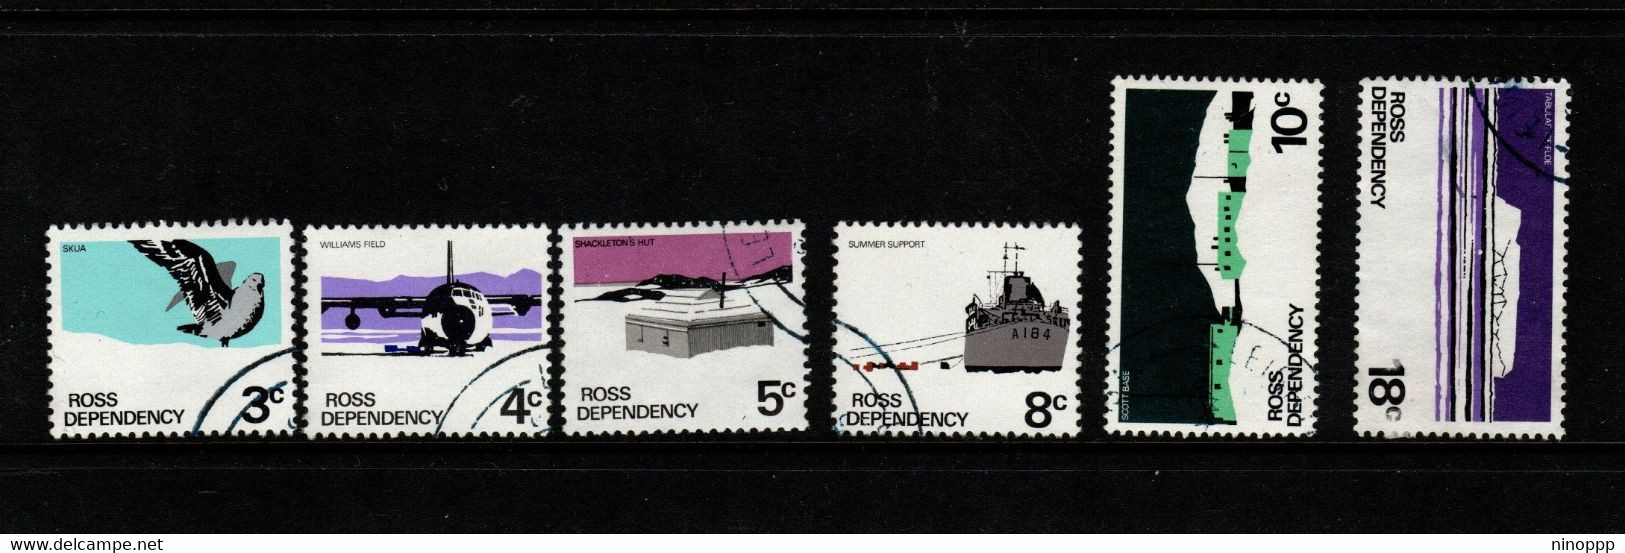 Ross Dependency SG 9-14 1972 Definitives,used - Gebraucht